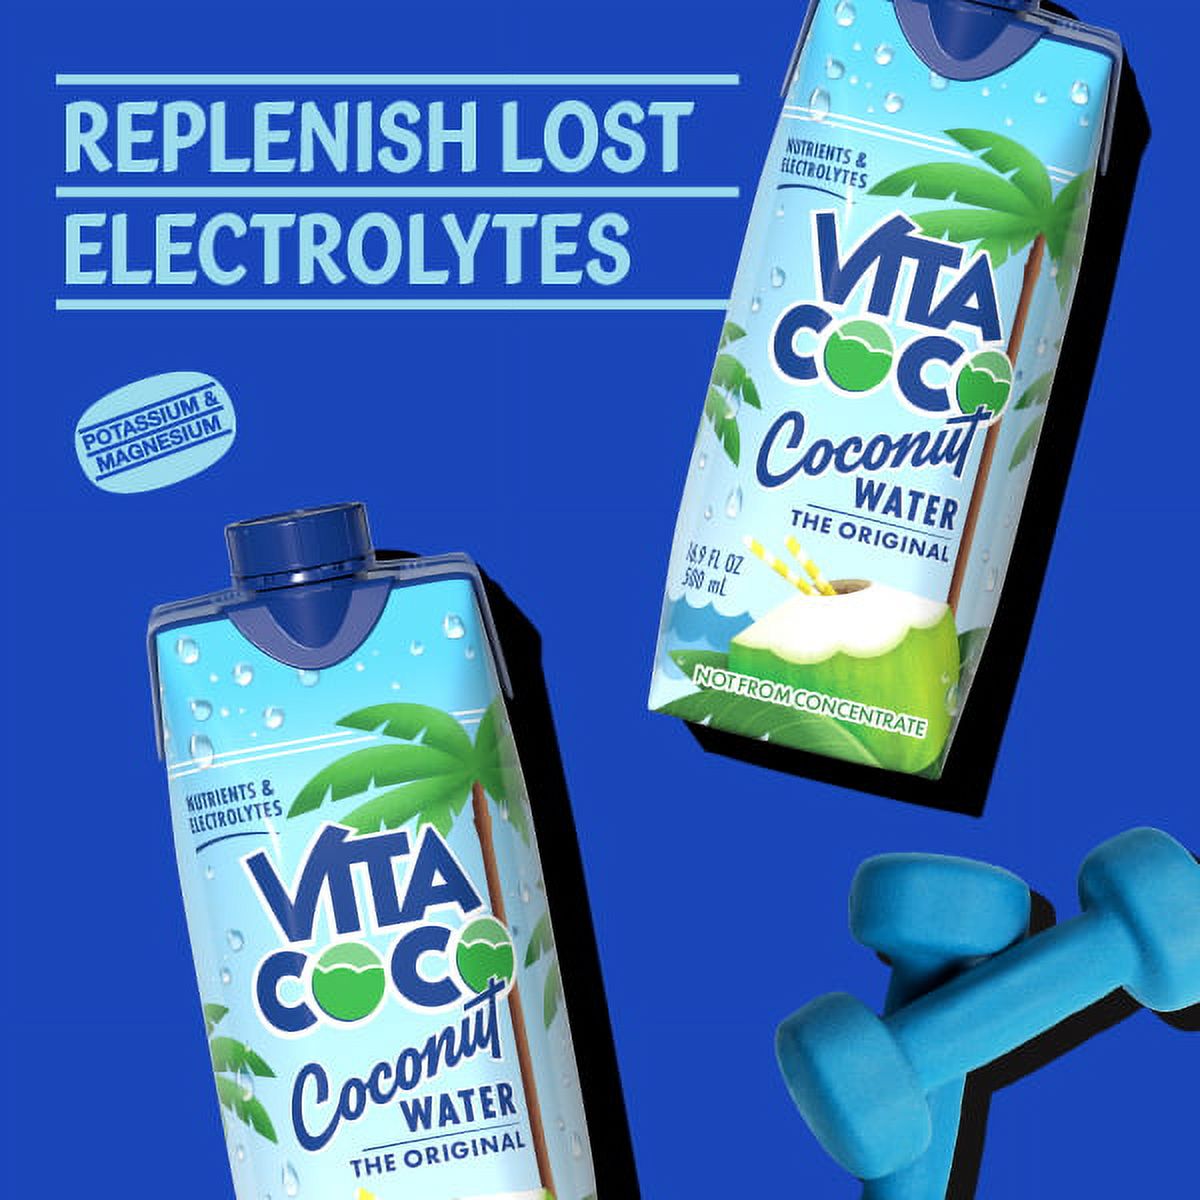 Vita Coco The Original Coconut Water, Nutrients & Electrolytes Rich, Pure, 16.9 fl oz Tetra, 4-Pack - image 4 of 8